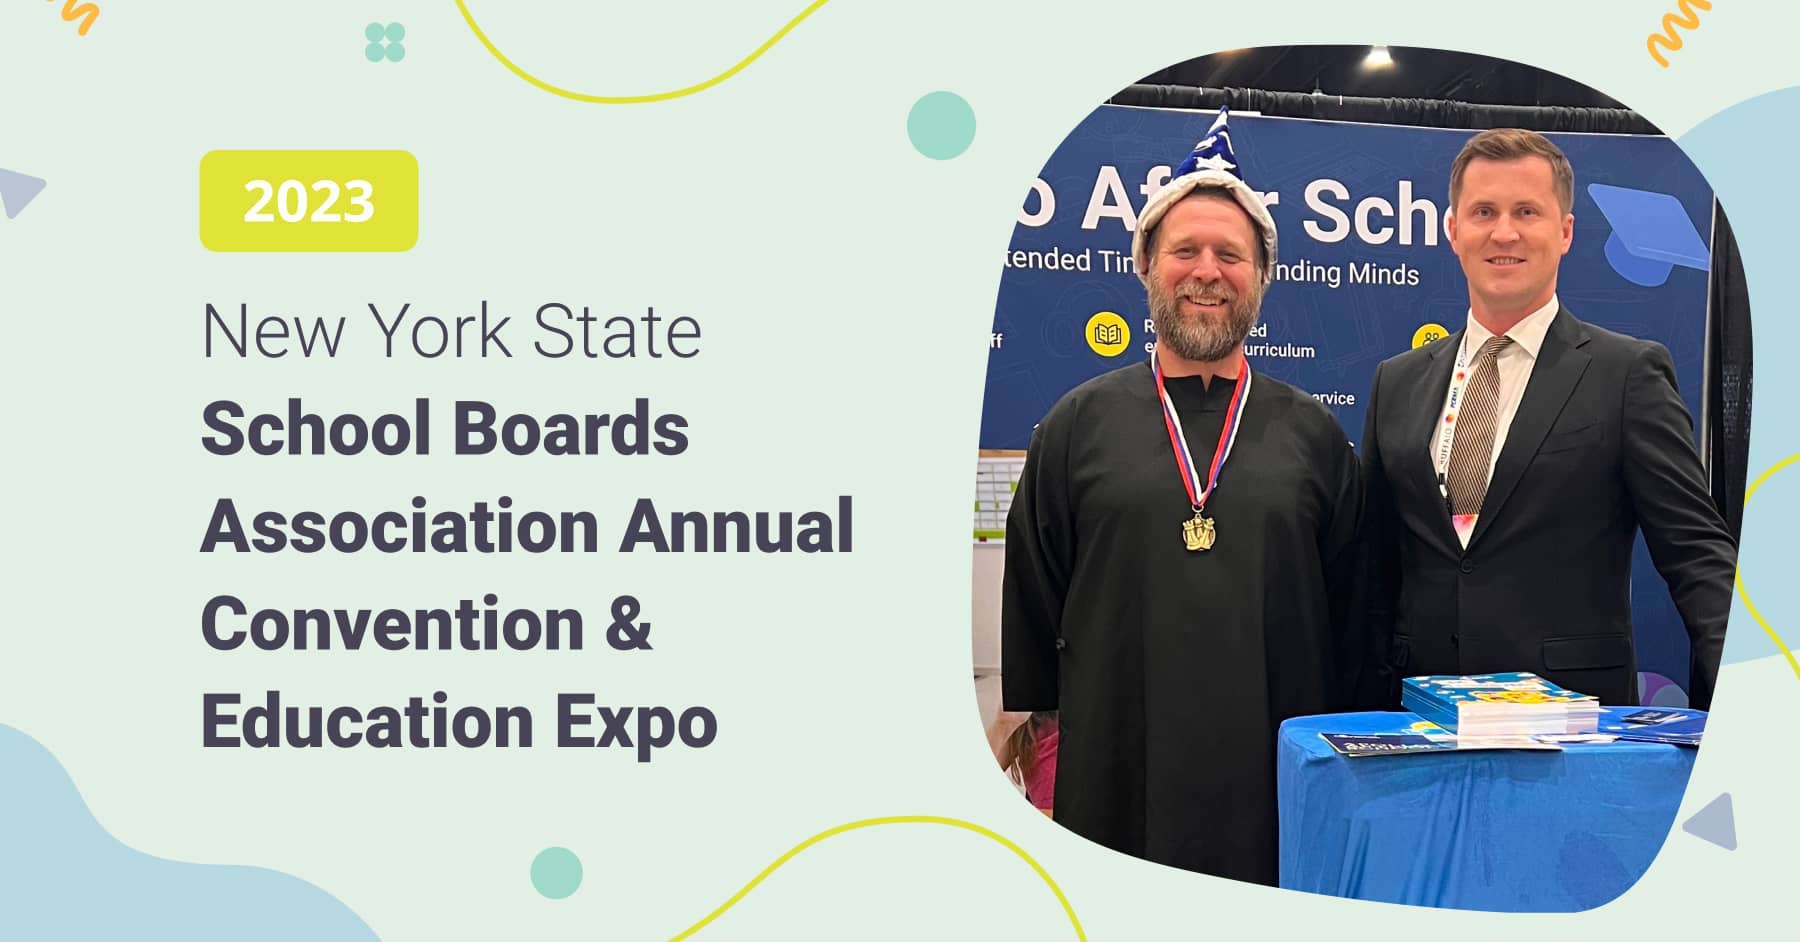 Apollo After School at the New York State School Boards Association Annual Convention & Education Expo